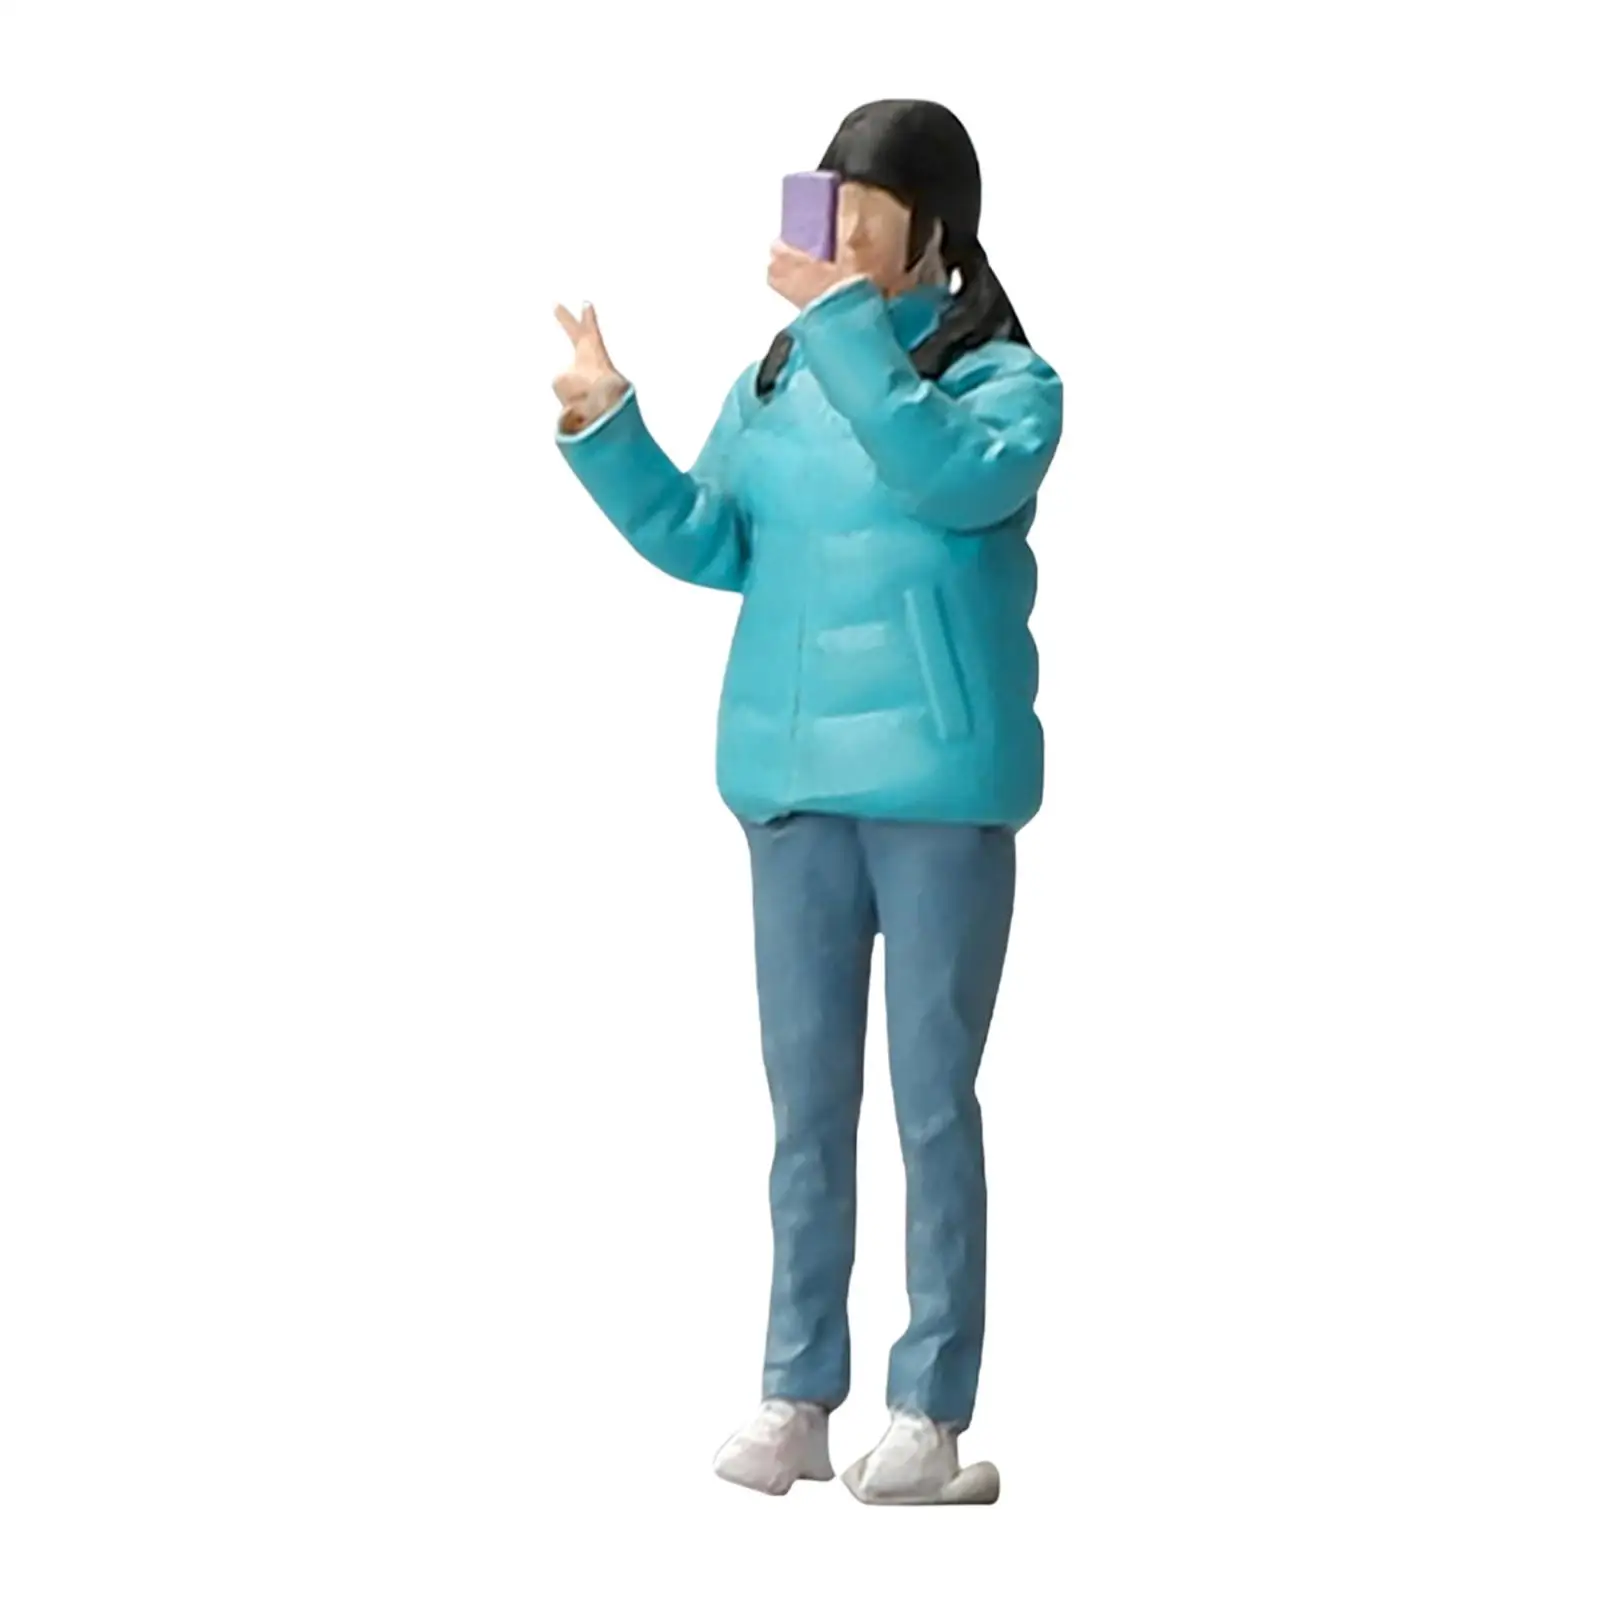 1/64 Scale People Figures DIY Crafts Down Jacket Girl Train Park Street People Figures Resin for Dollhouse Scenery Landscape